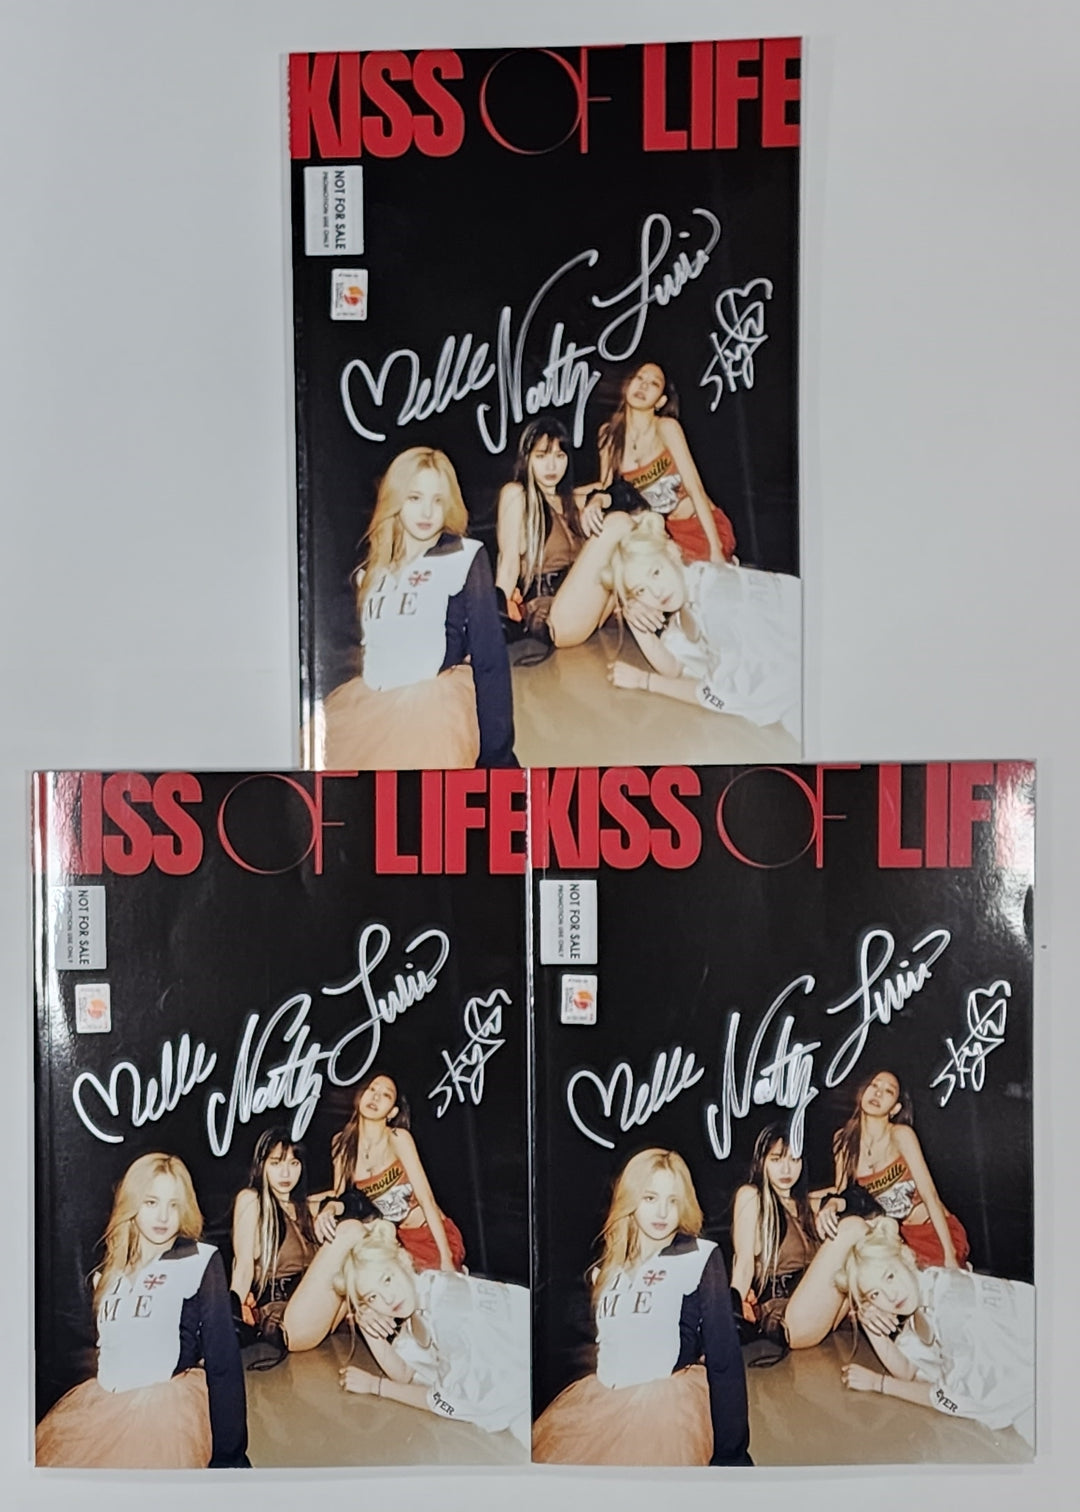 KISS OF LIFE "KISS OF LIFE"- Hand Autographed(Signed) Promo Album